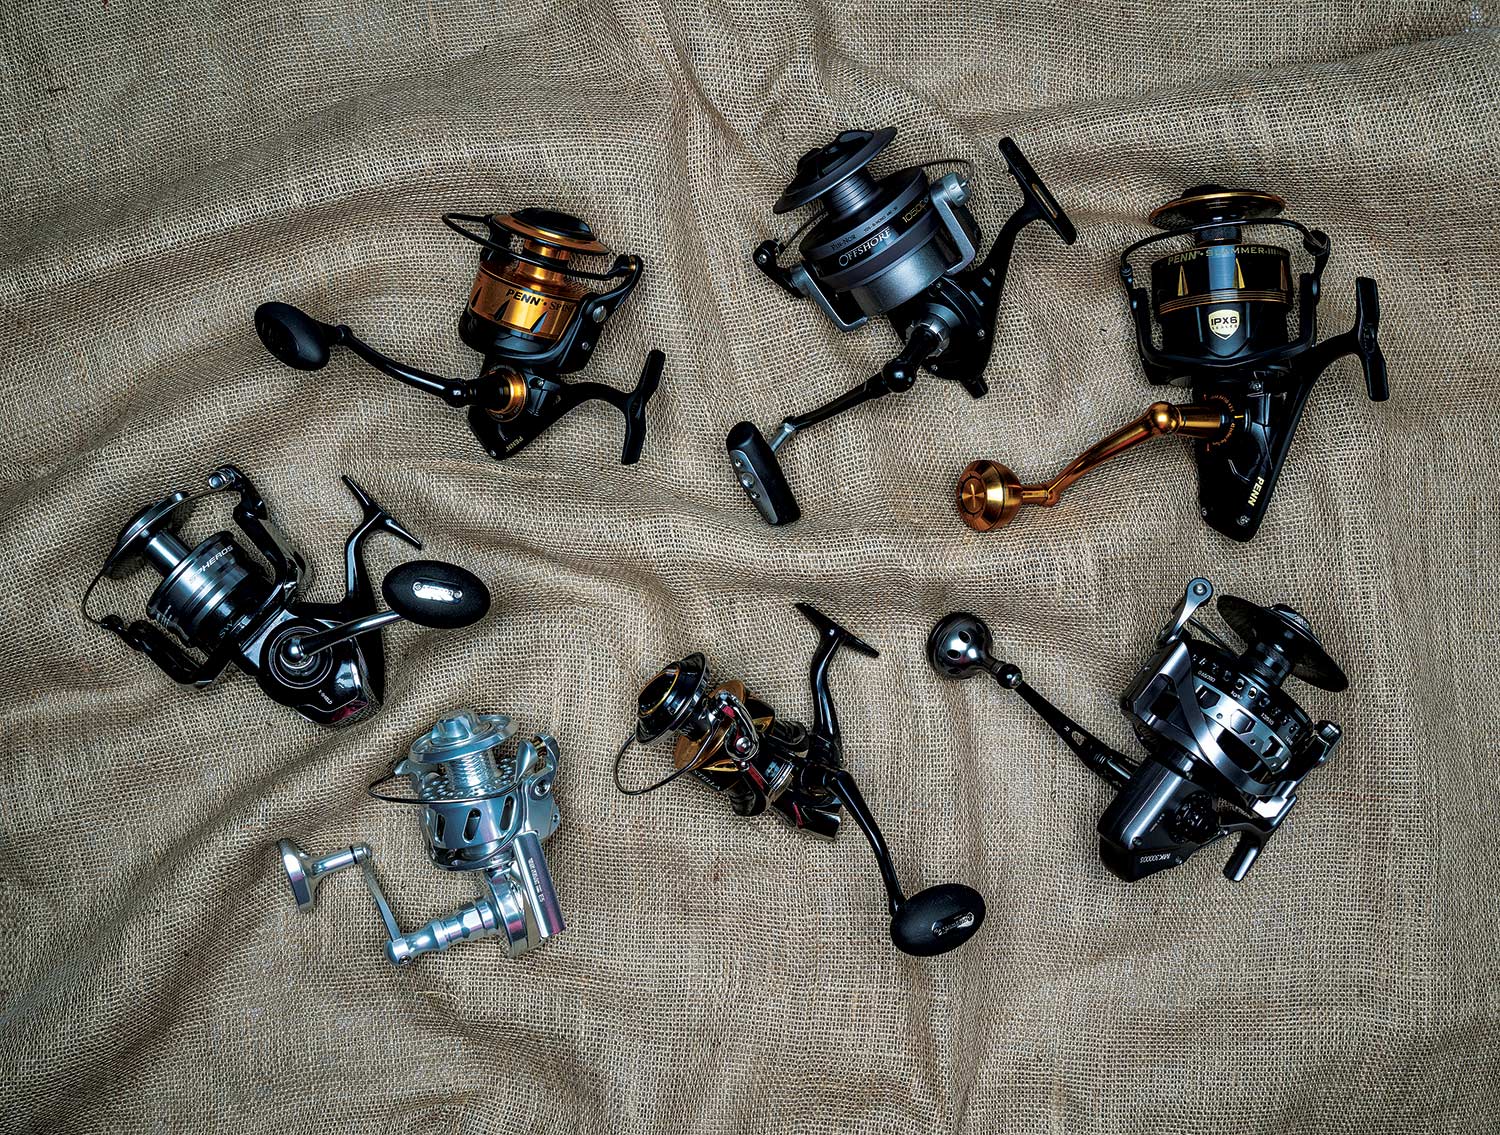 Penn Saltwater Spinning Reels. Spinning Reels for Offshore F